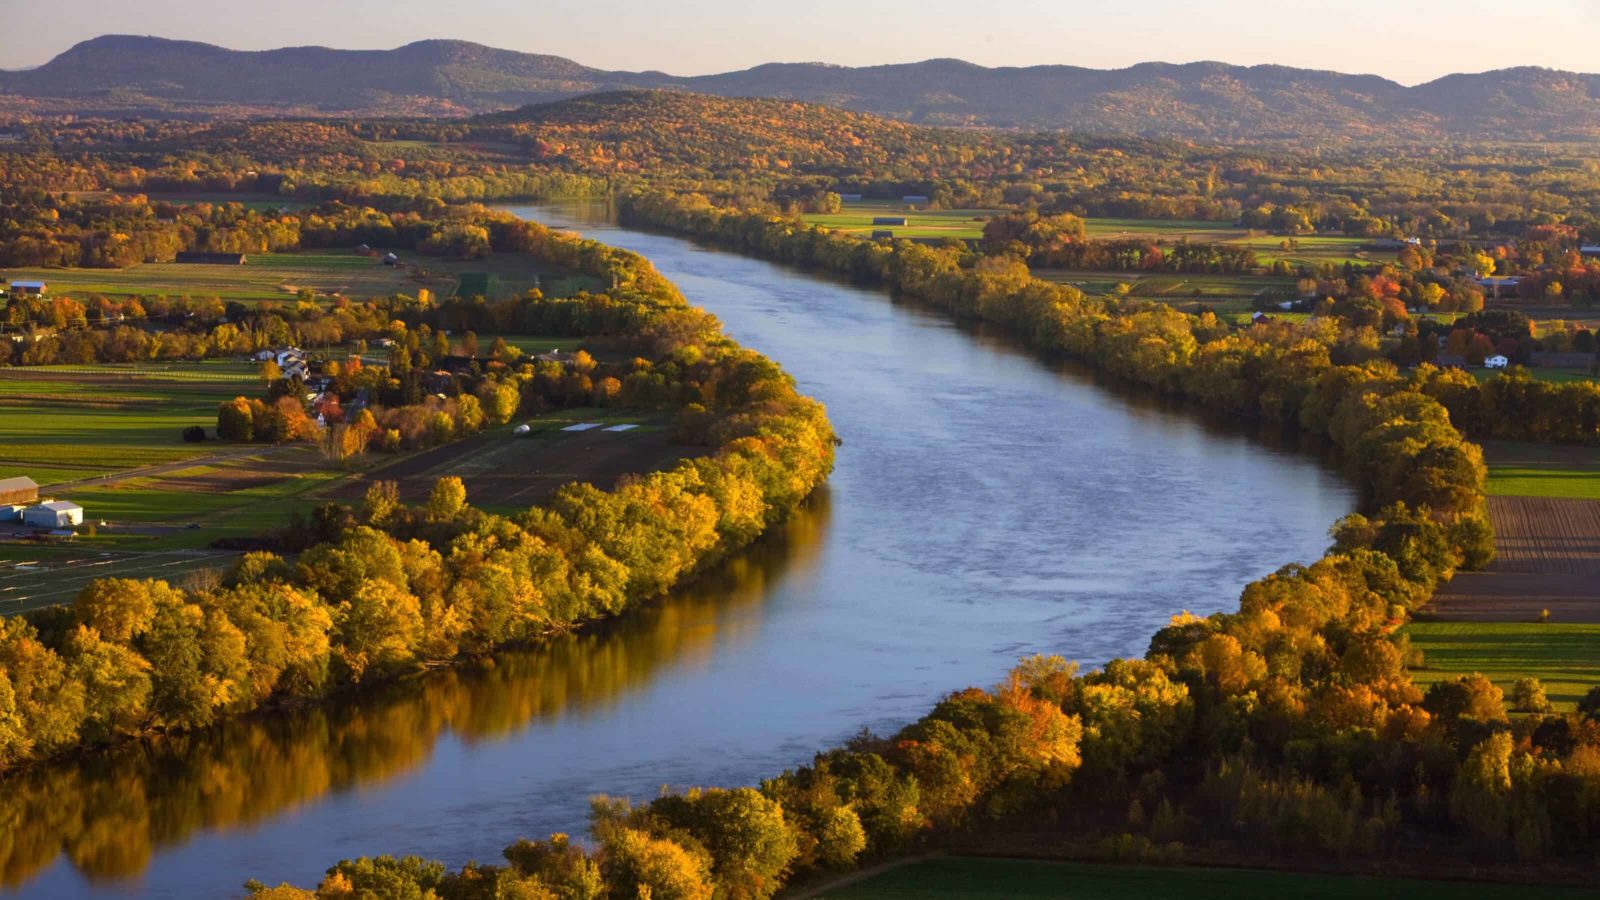 Hike to the top of Mount Sugarloaf for a view of the Connecticut River. Photo courtesy of Paradise City Arts Festival.